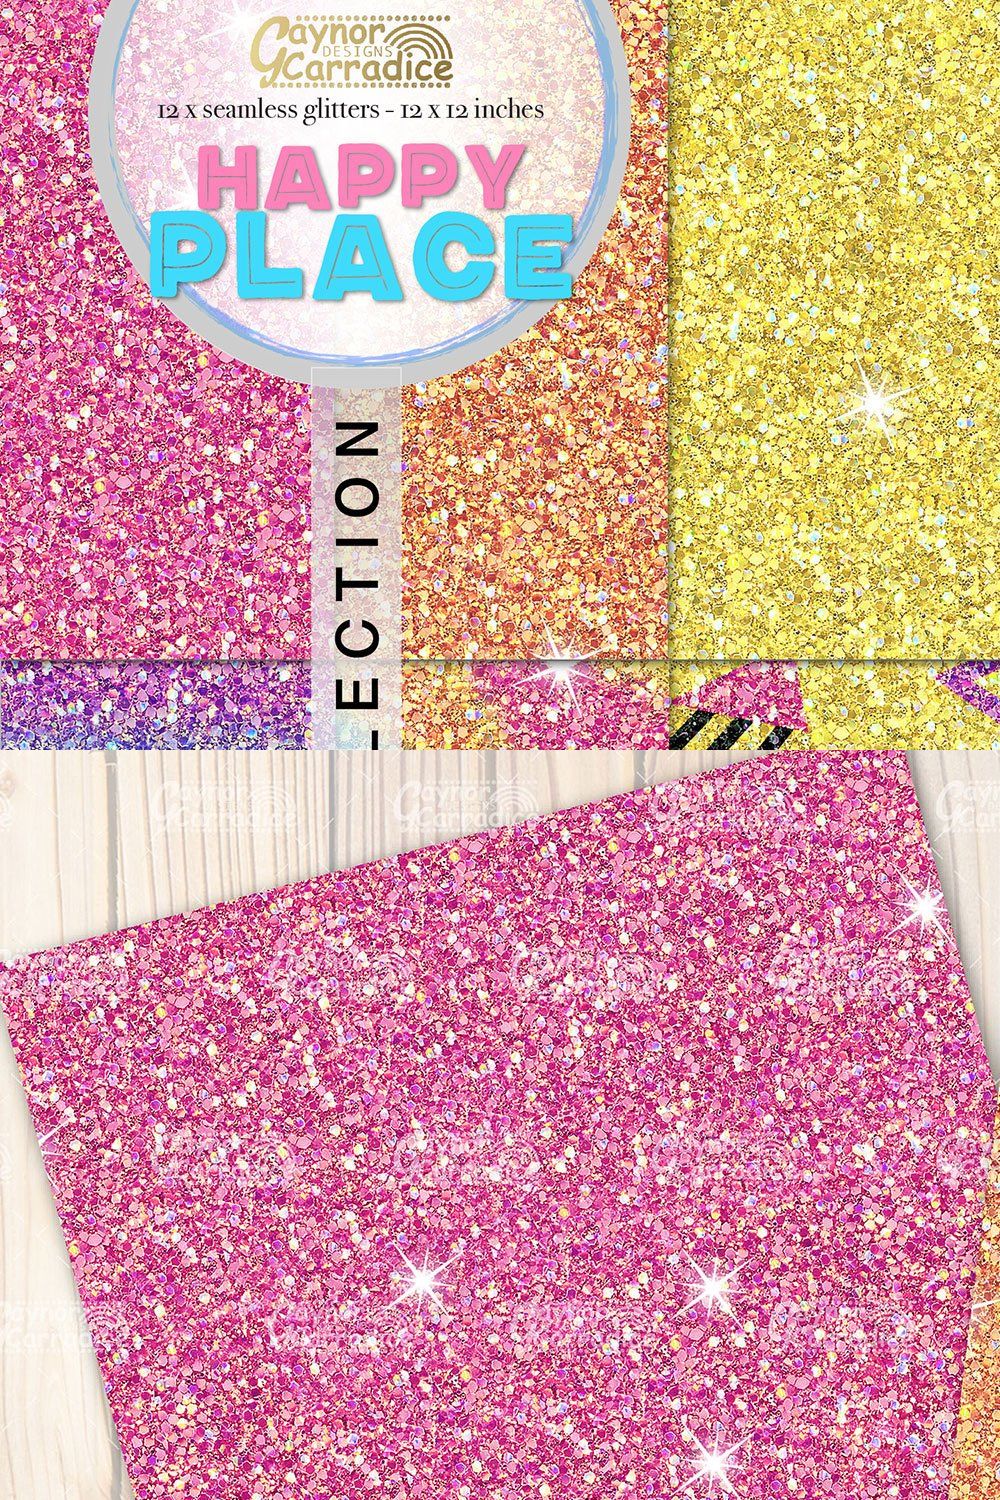 Happy Place - Rainbow glitters pinterest preview image.